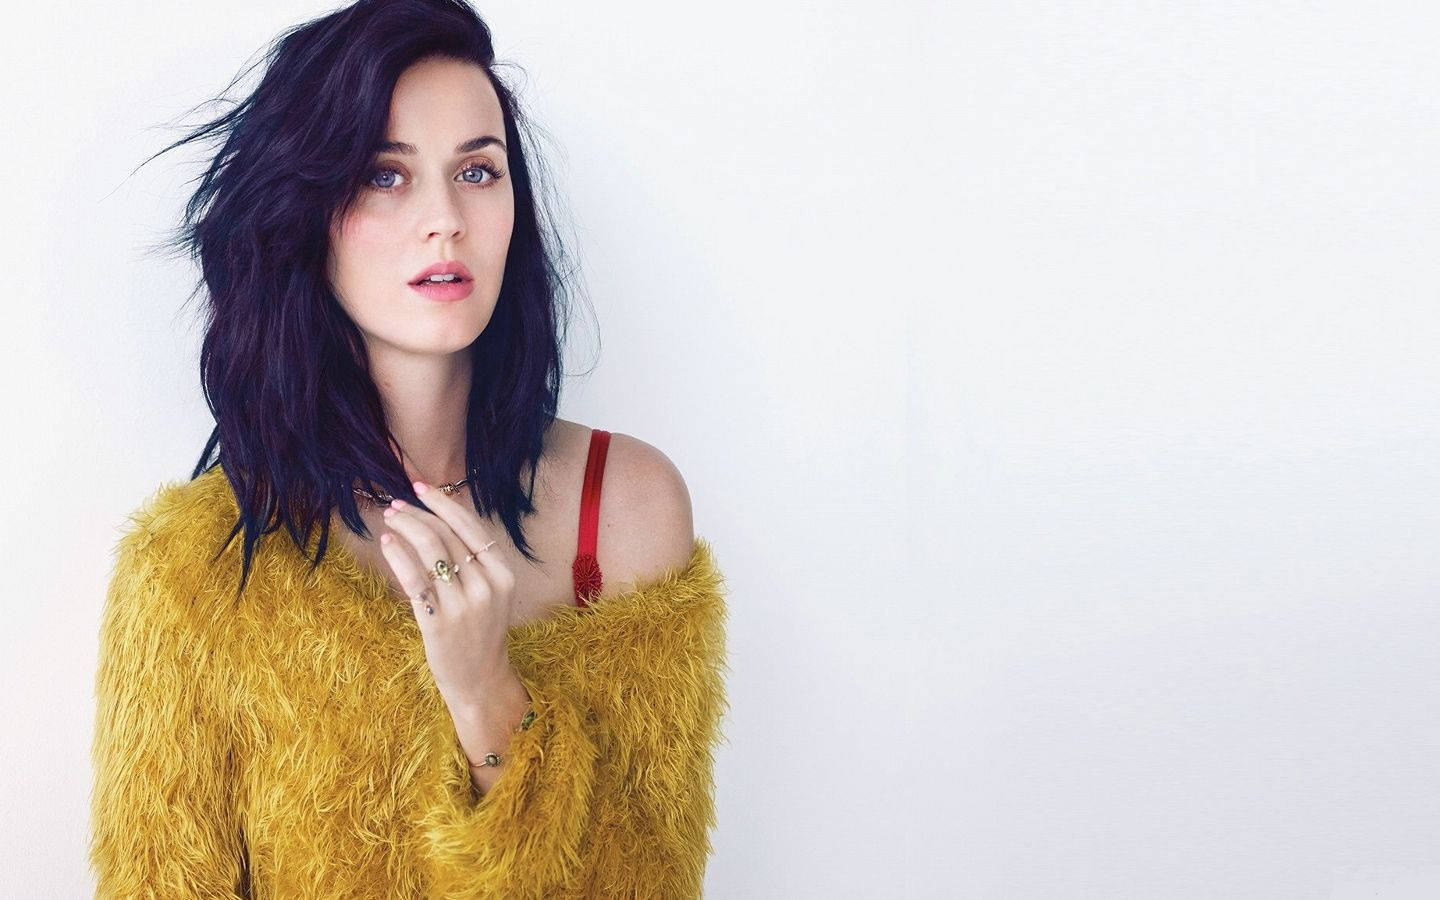 Katy Perry Looking Stylish In A Yellow Fur Shirt Background